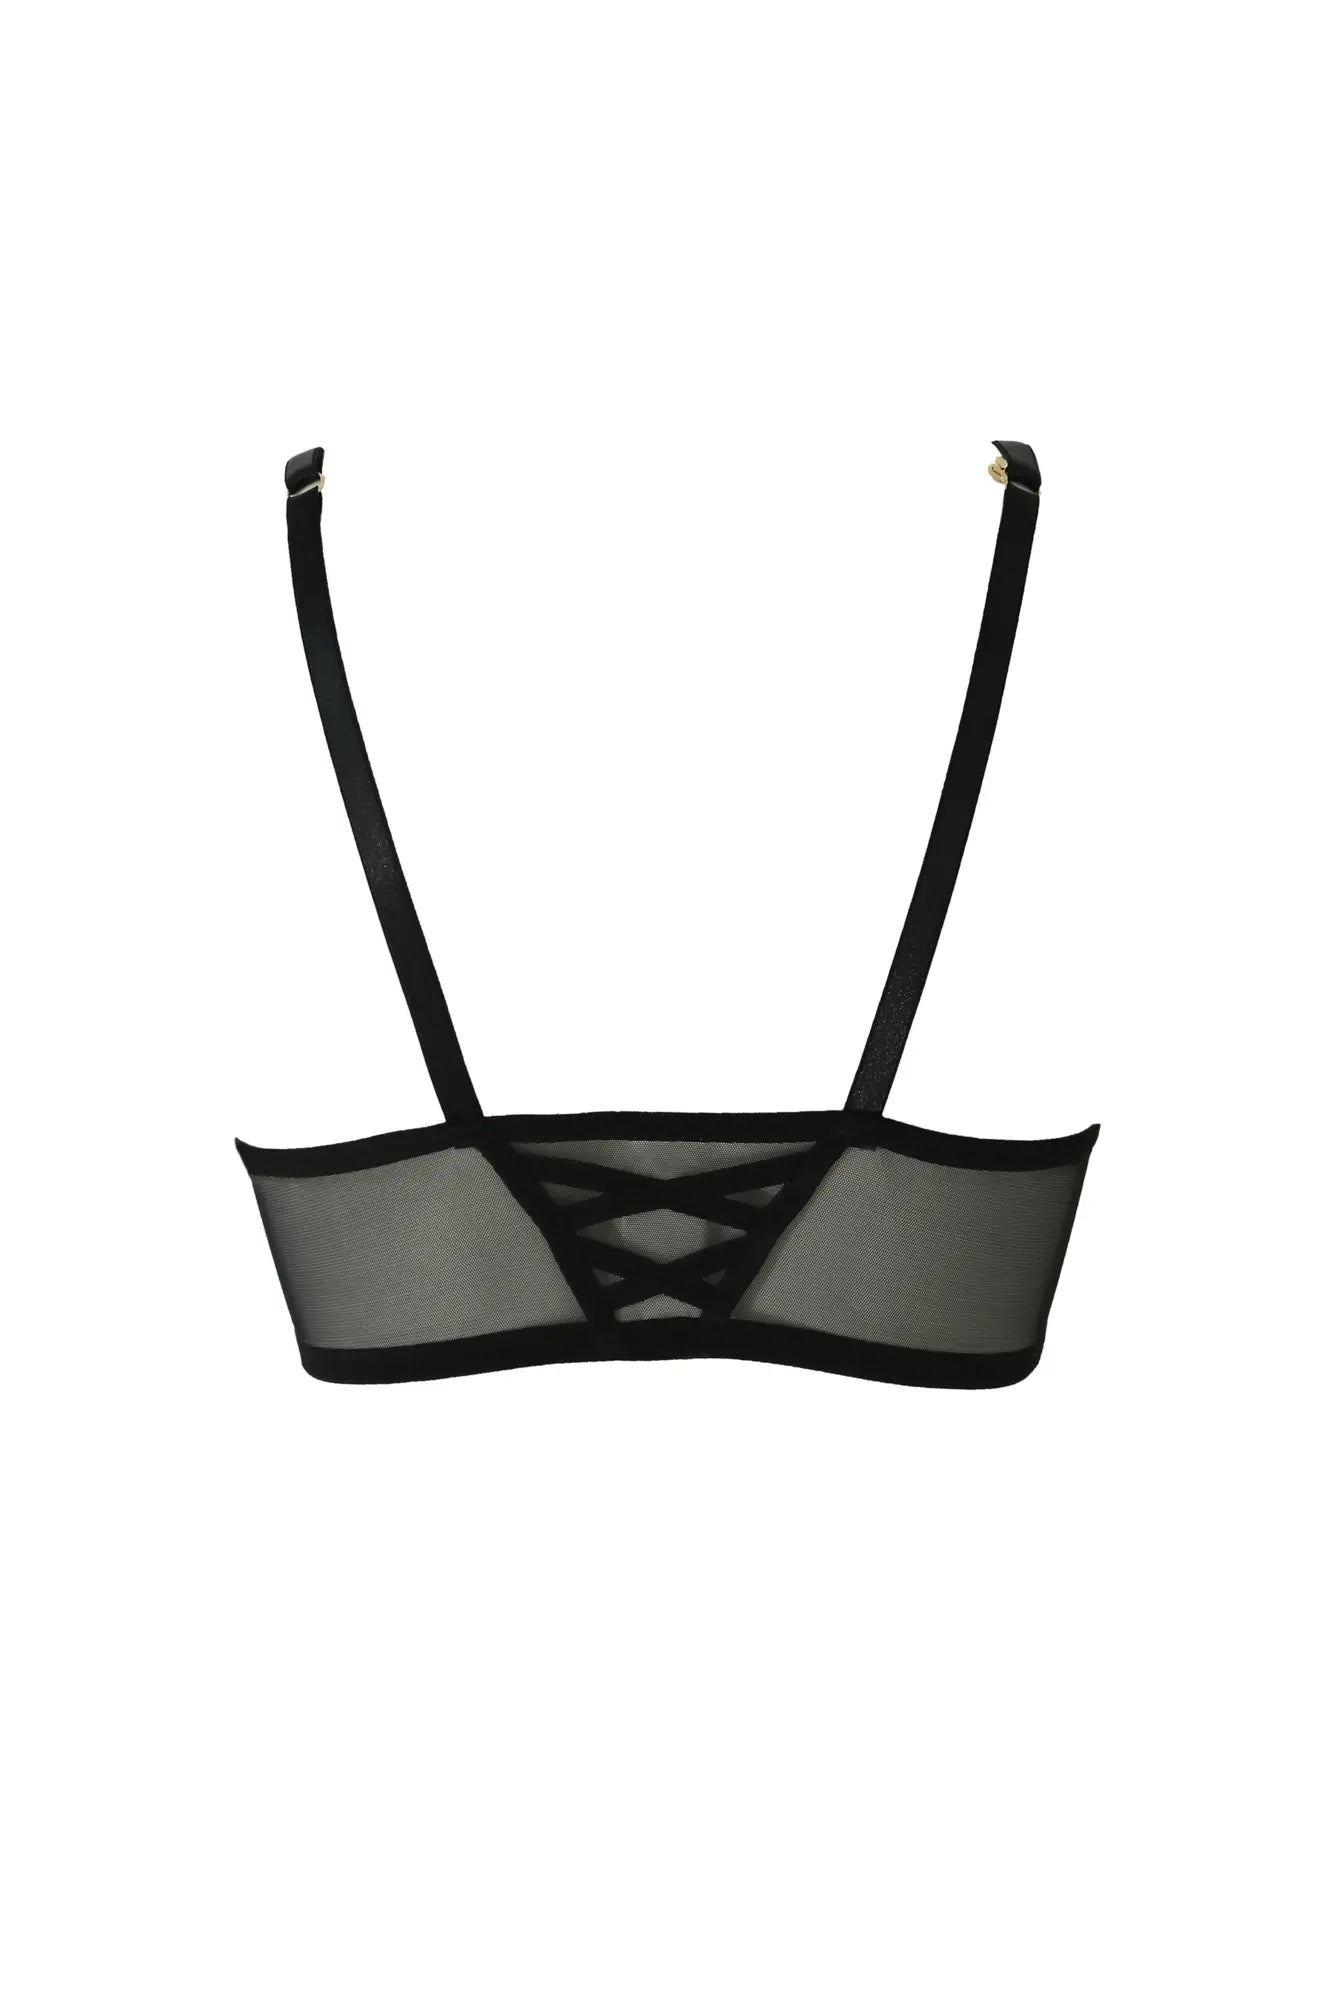 36e Push Up Bra - Get Best Price from Manufacturers & Suppliers in India